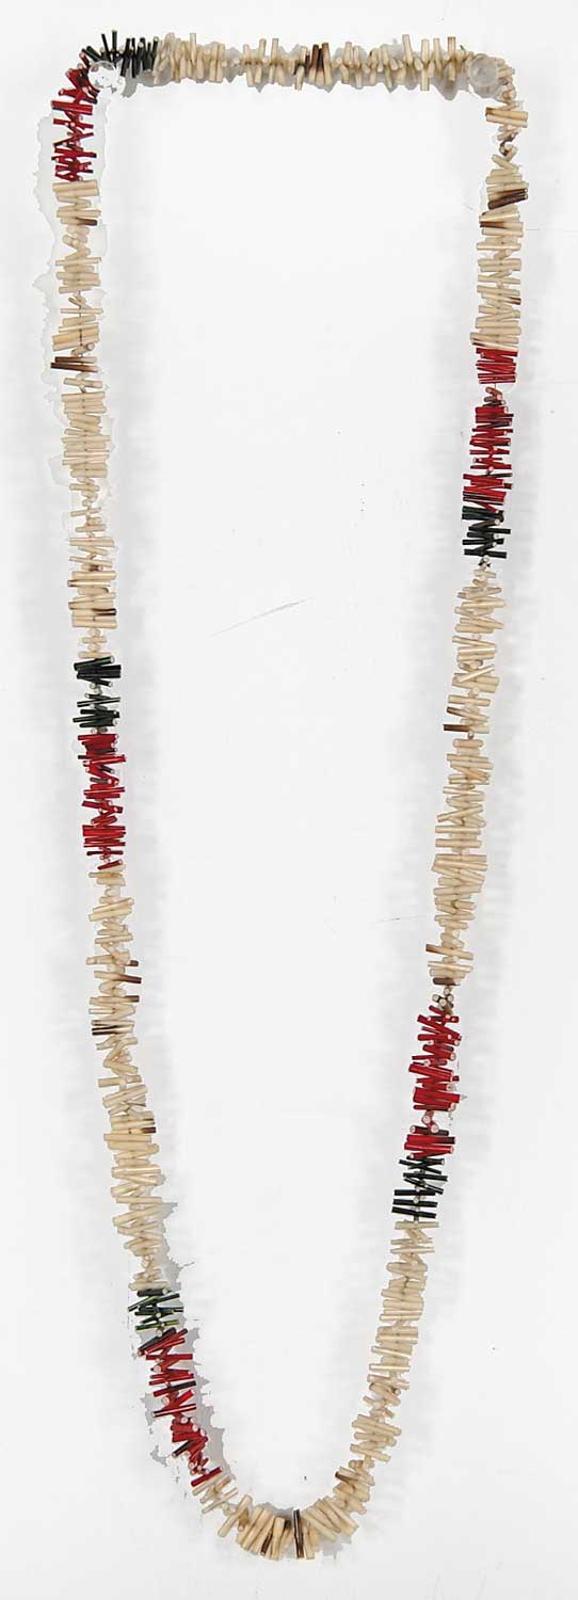 First Nations Basket School - Quill Necklace